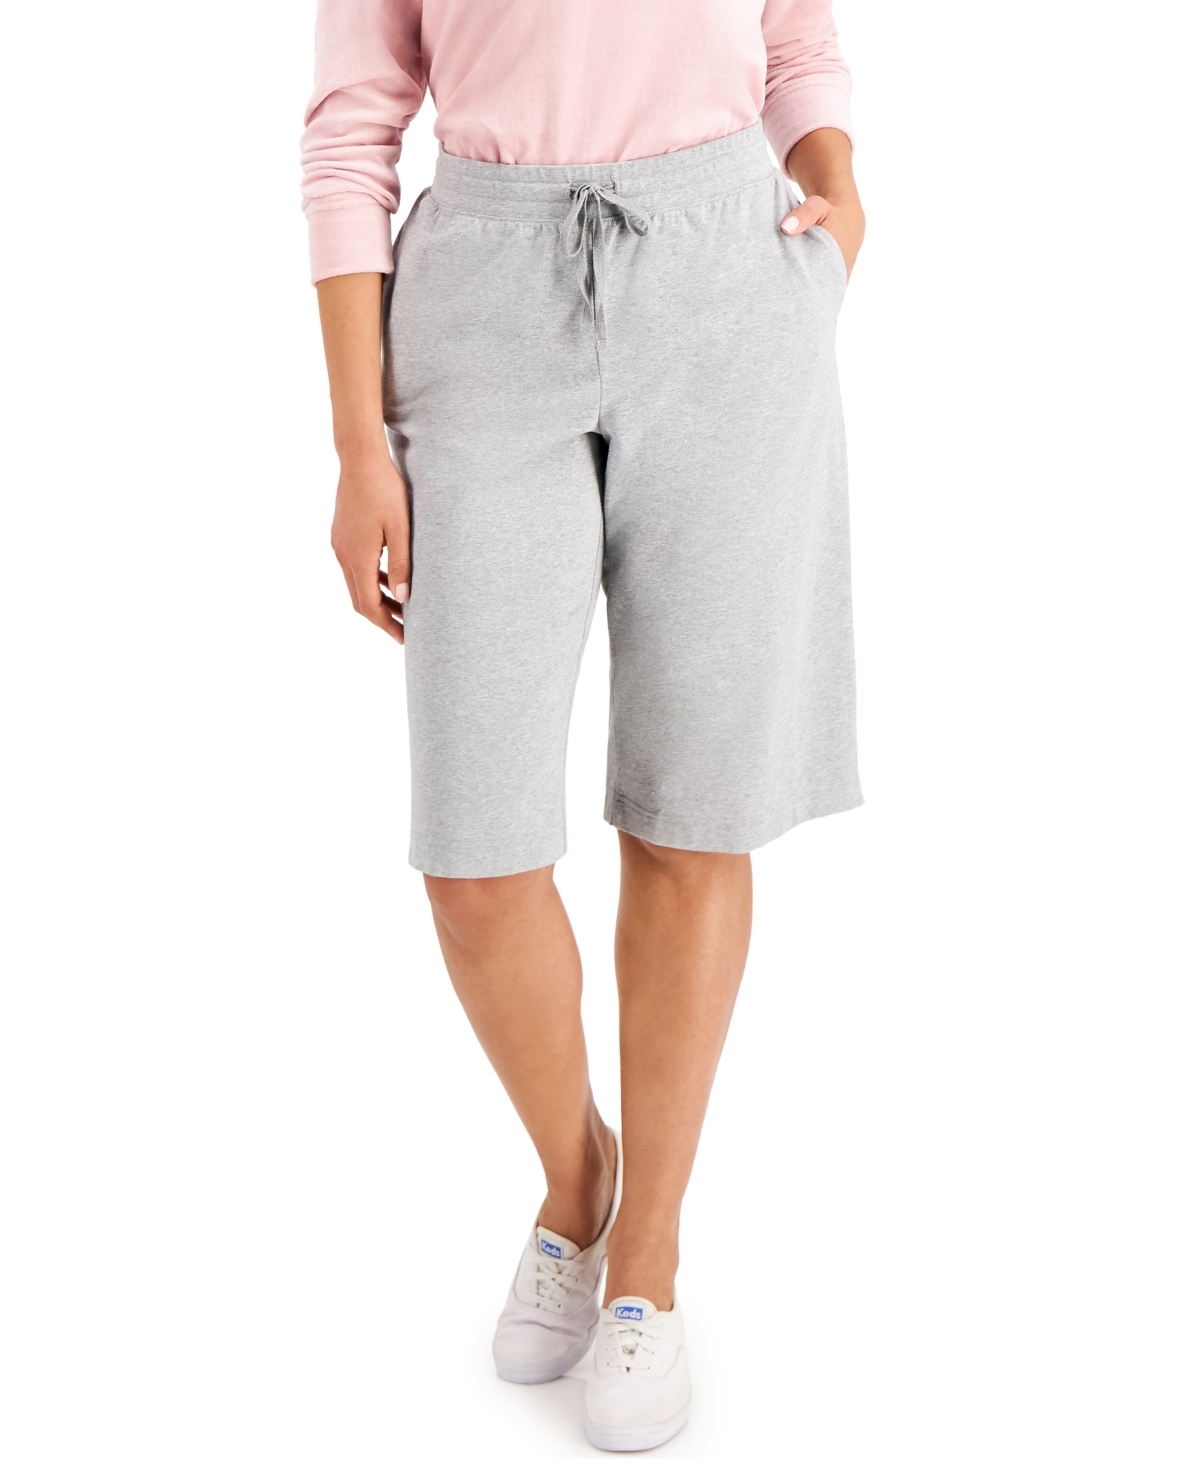 Knit Skimmer Shorts, Created for Macy's - Smoke Grey Heather